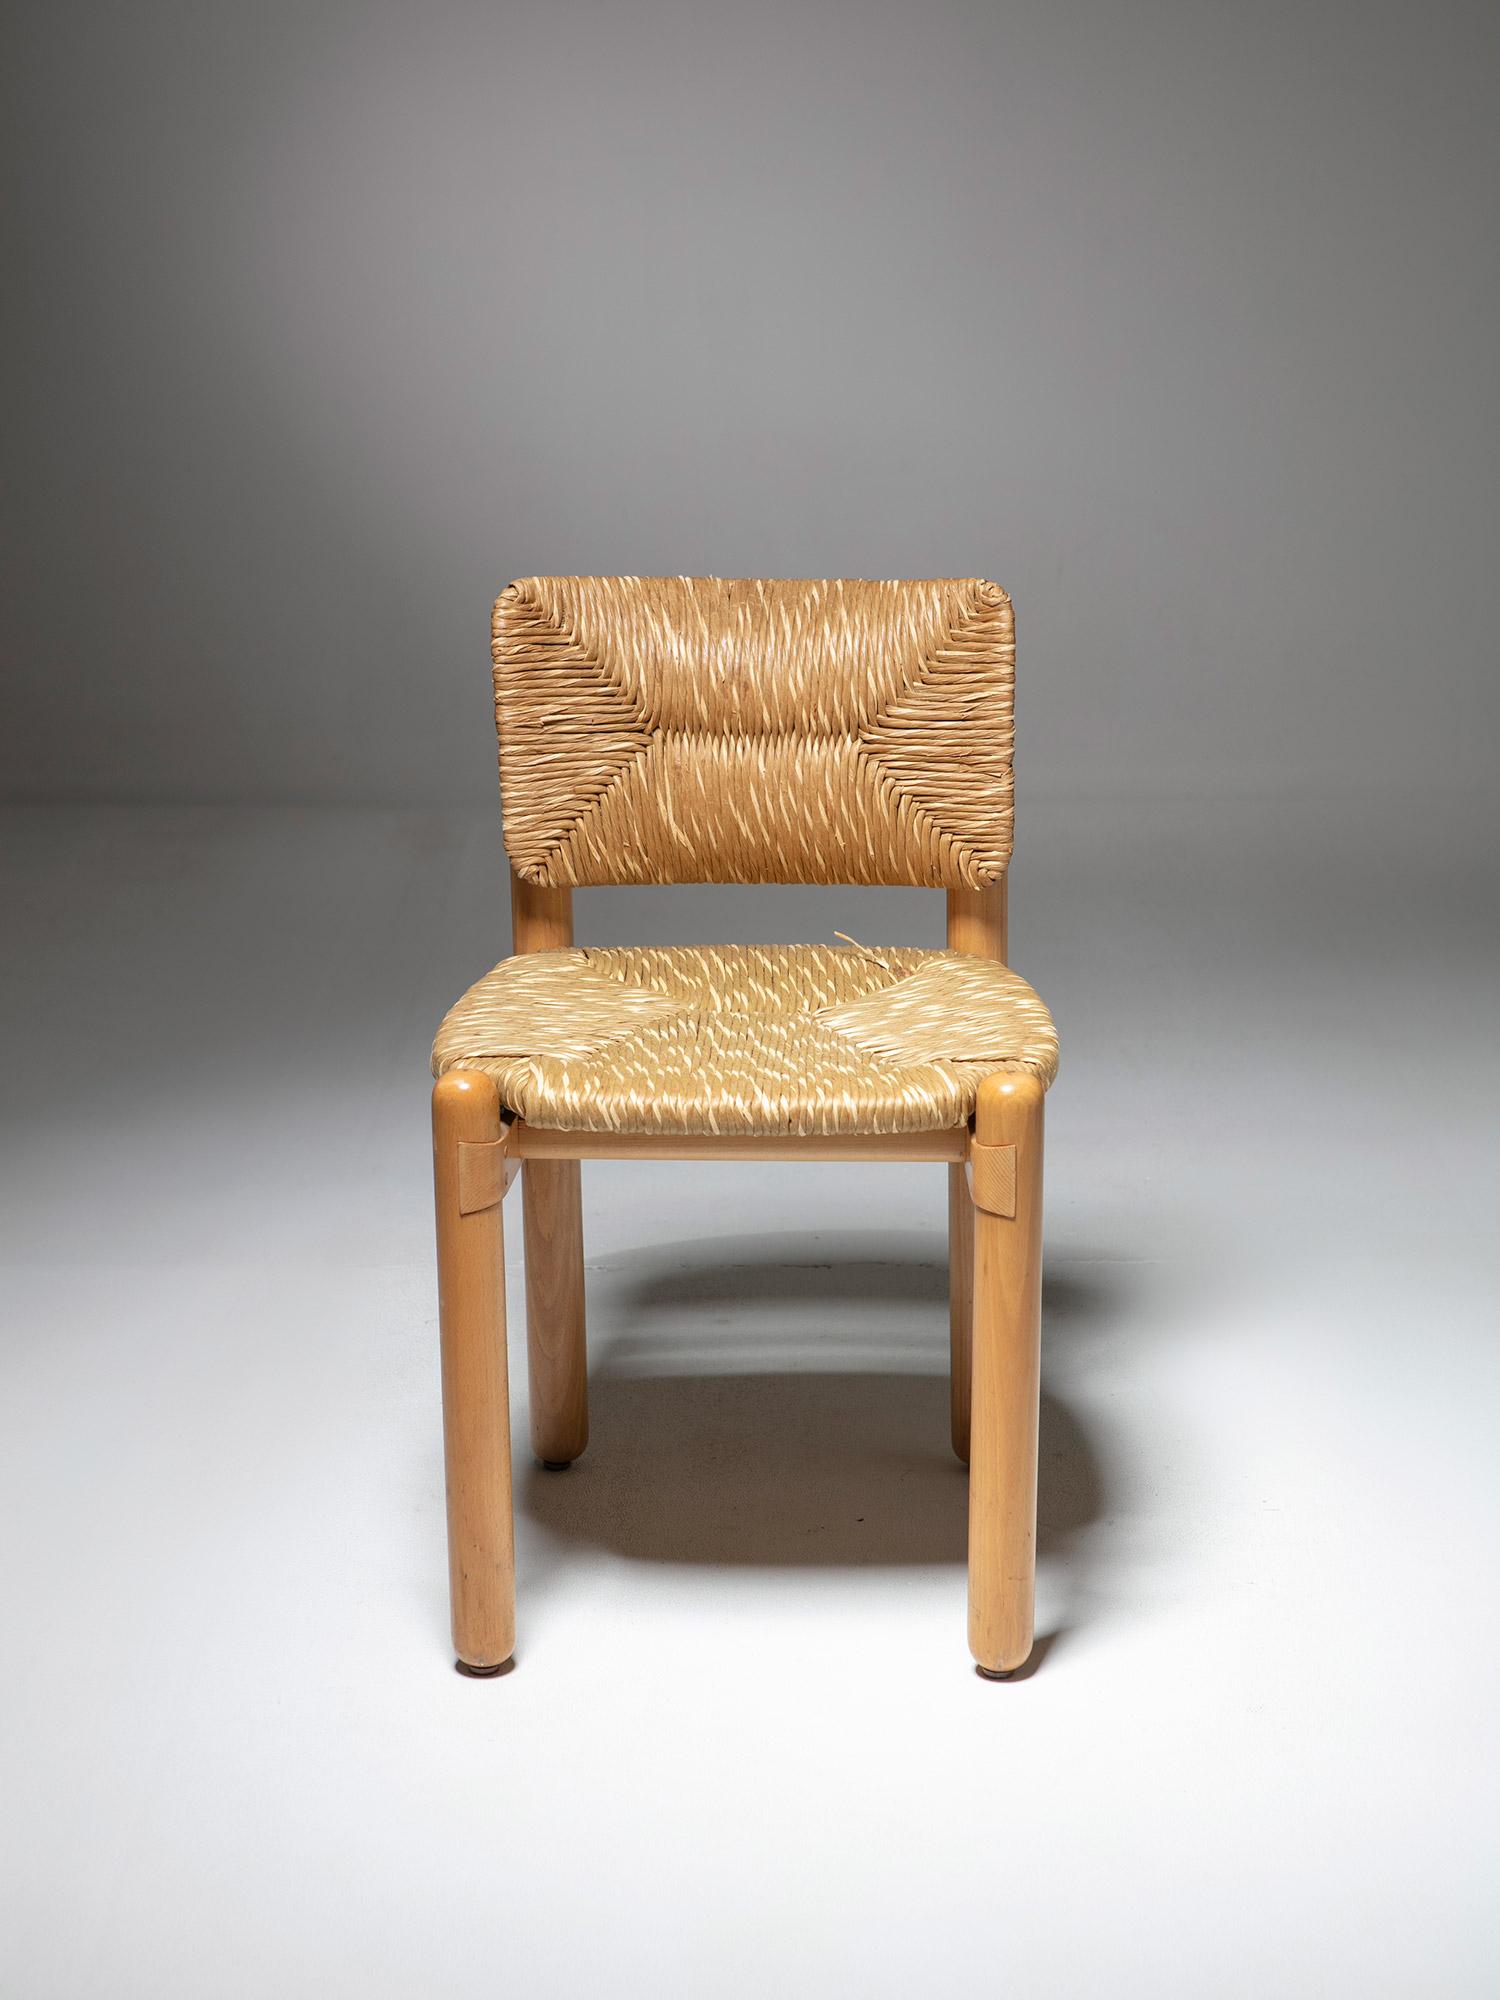 Set of Four Baba Wood Chairs by Assostudio for Pozzi & Verga, Italy, 1980s For Sale 2